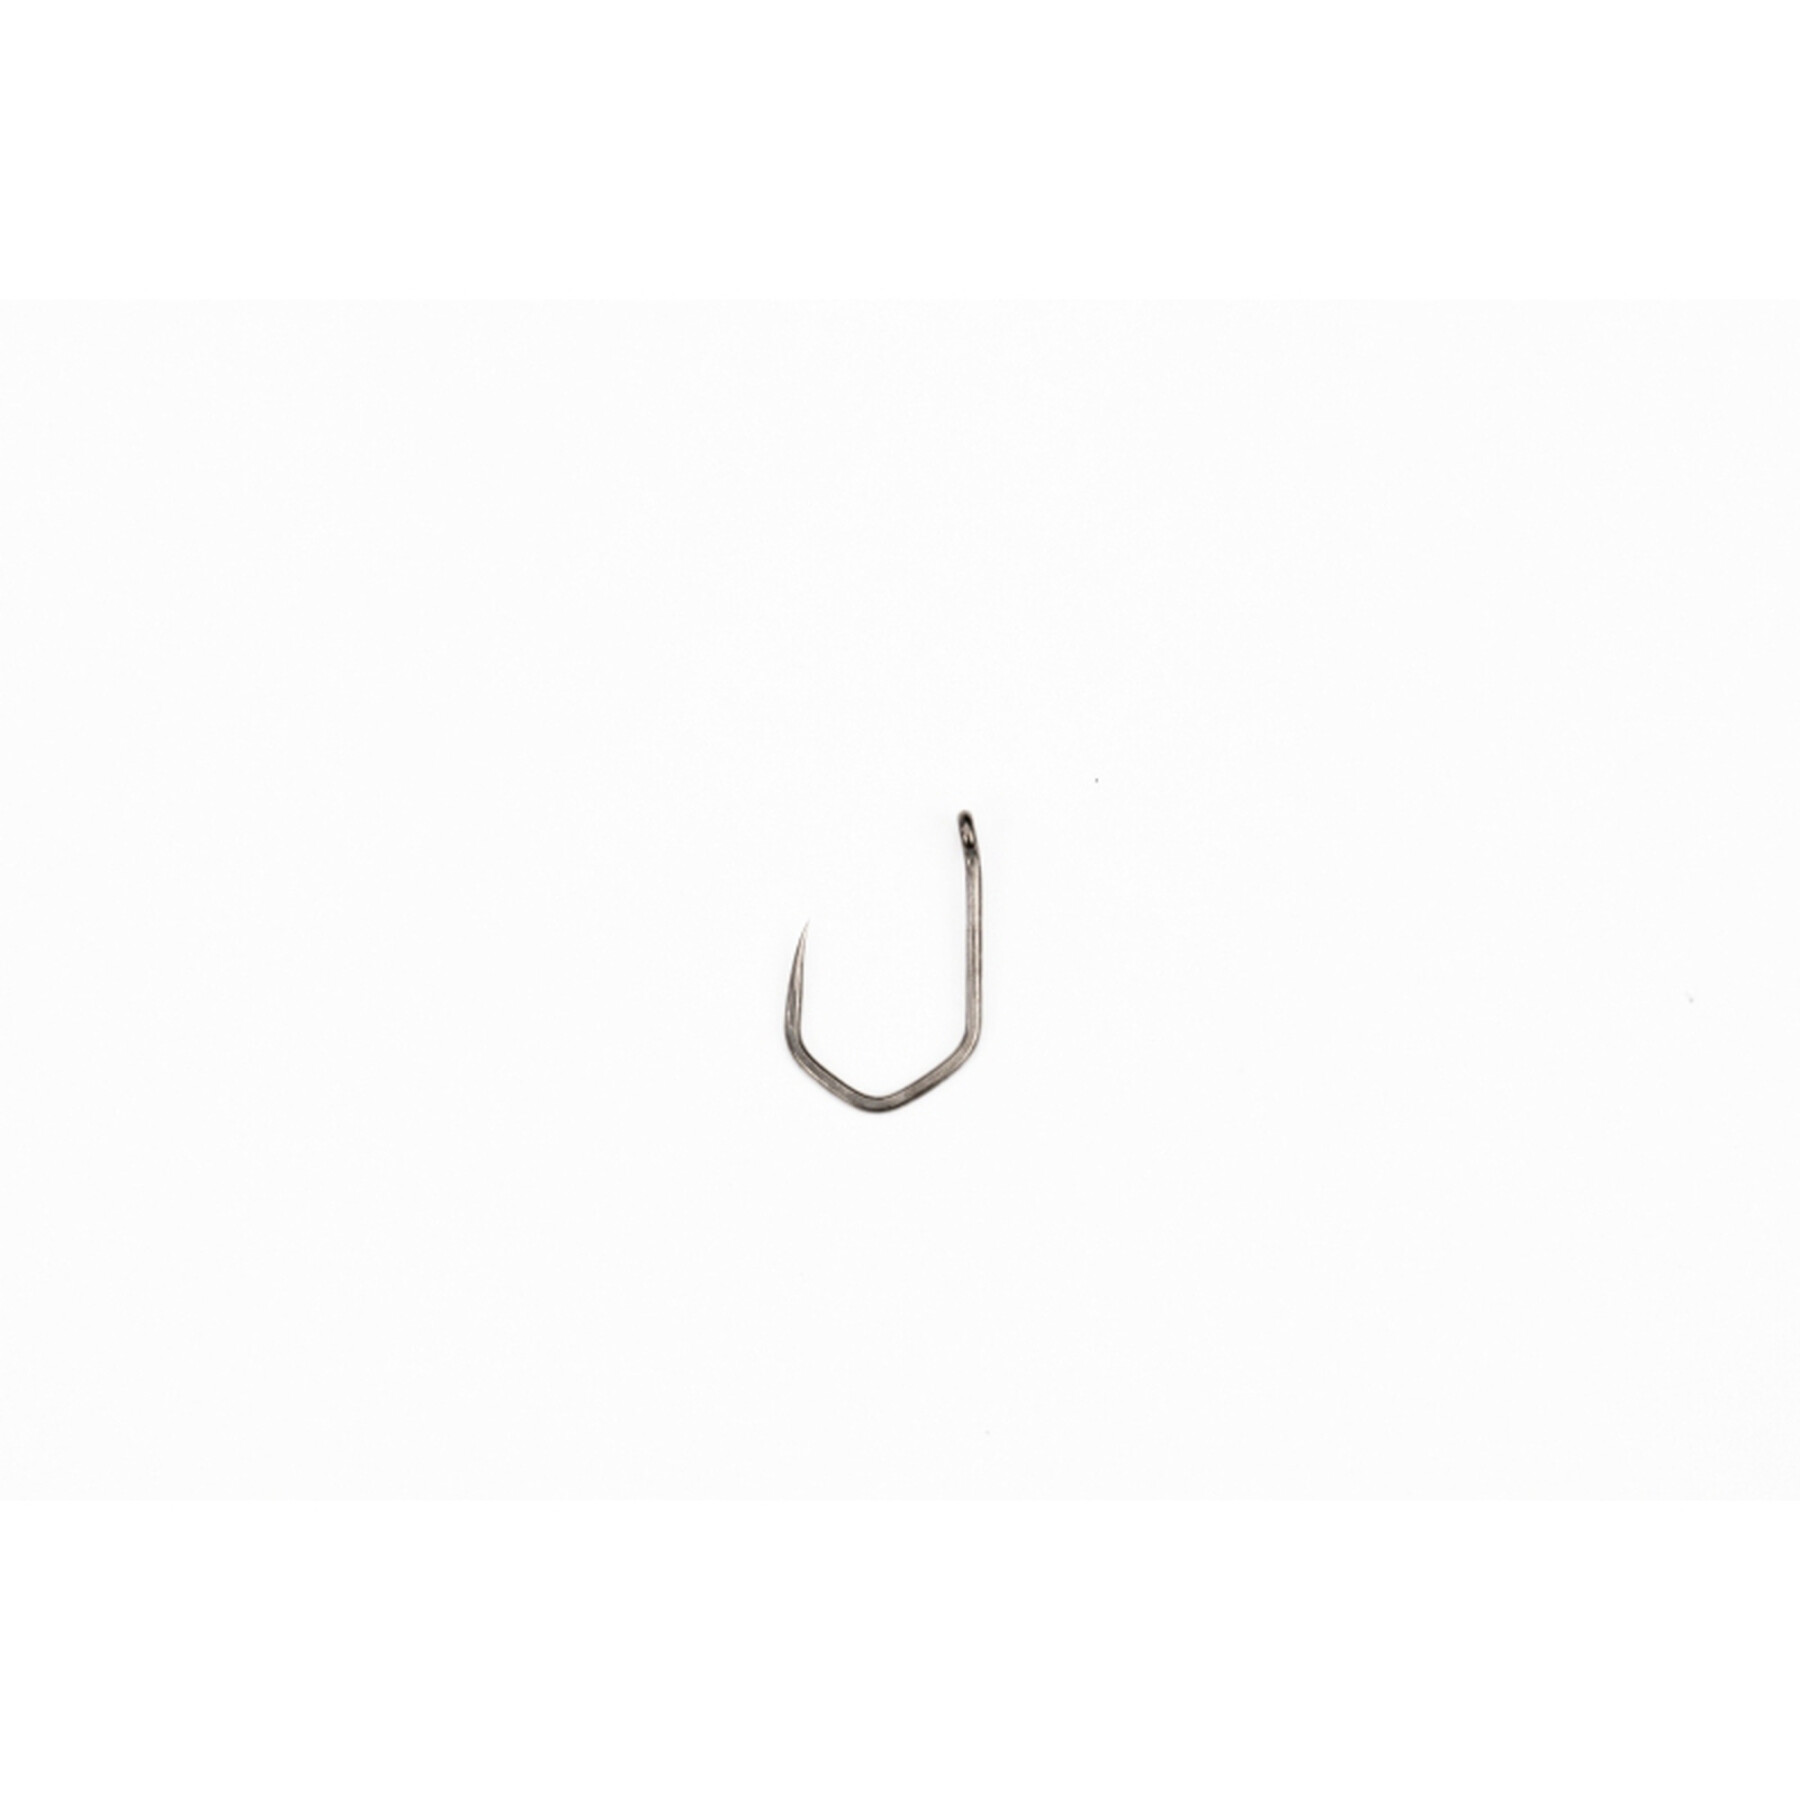 Hook Pinpoint Claw size 6 without swivel